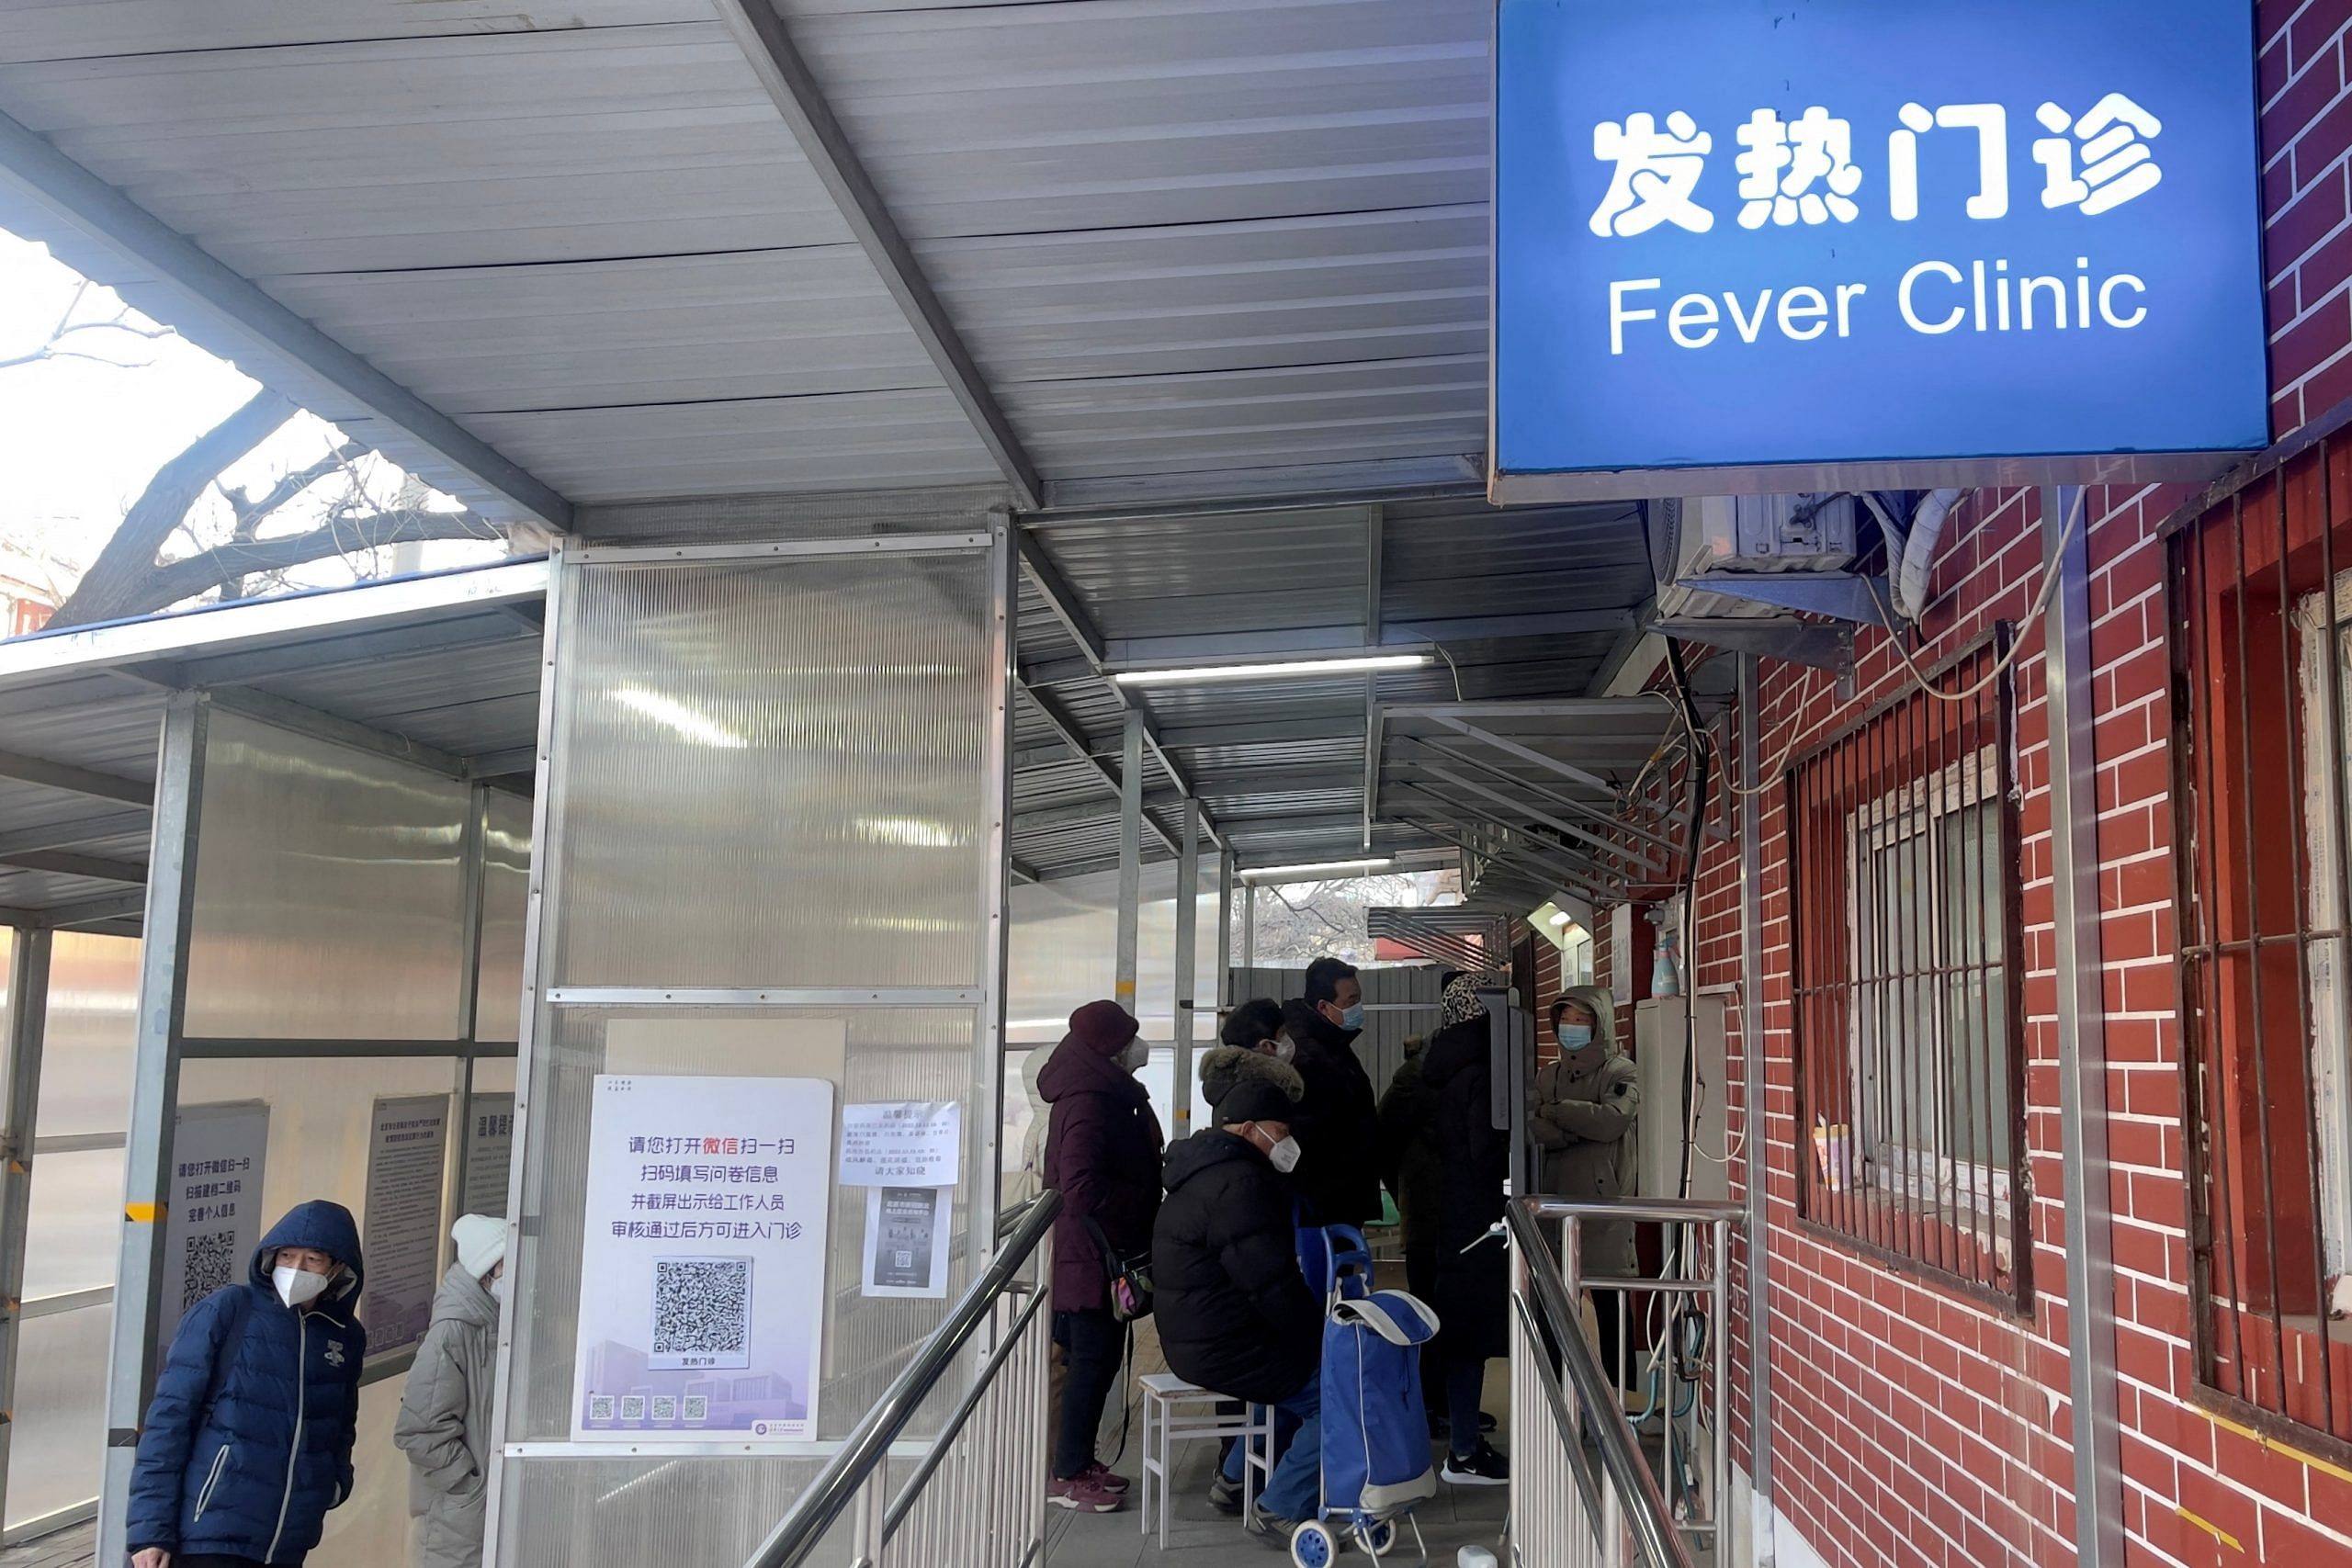 People wait outside a fever clinic of a hospital amid the coronavirus outbreak in Beijing, China on 15 December 2022 | Photo: Reuters/Josh Arslan